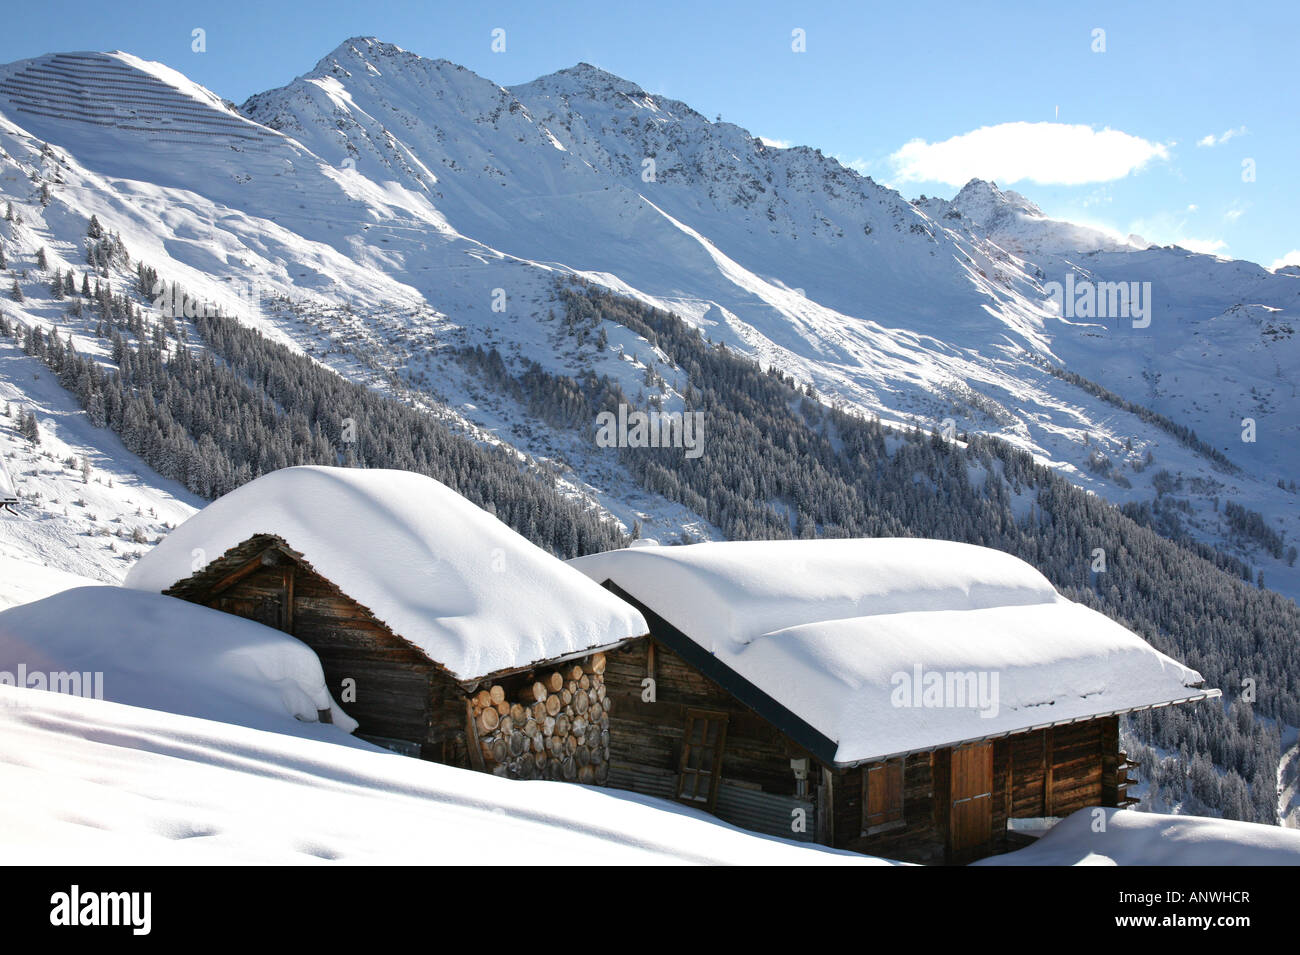 Old summer mountain chalets above the ski resort of Verbier Switzerland Stock Photo